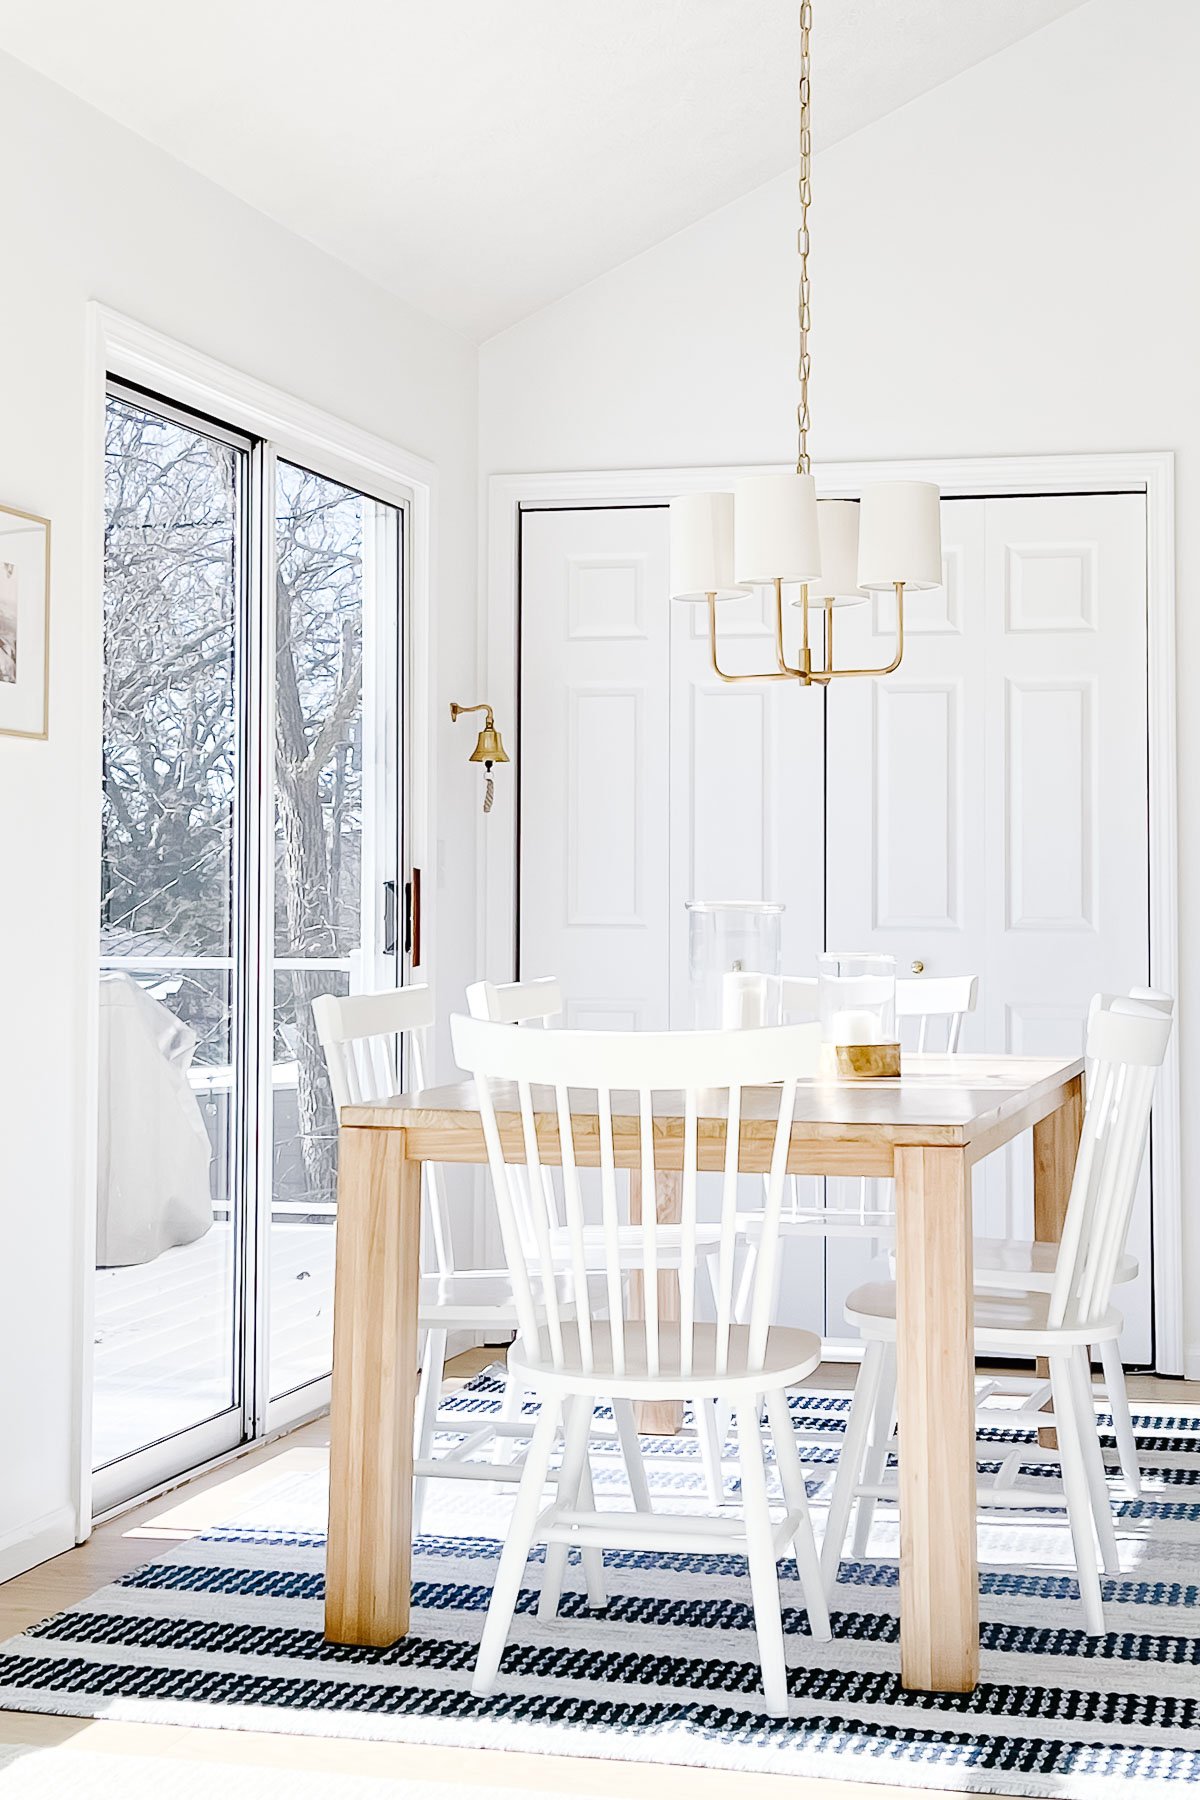 A white kitchen dining area with a blue and white striped indoor outdoor rug under the table